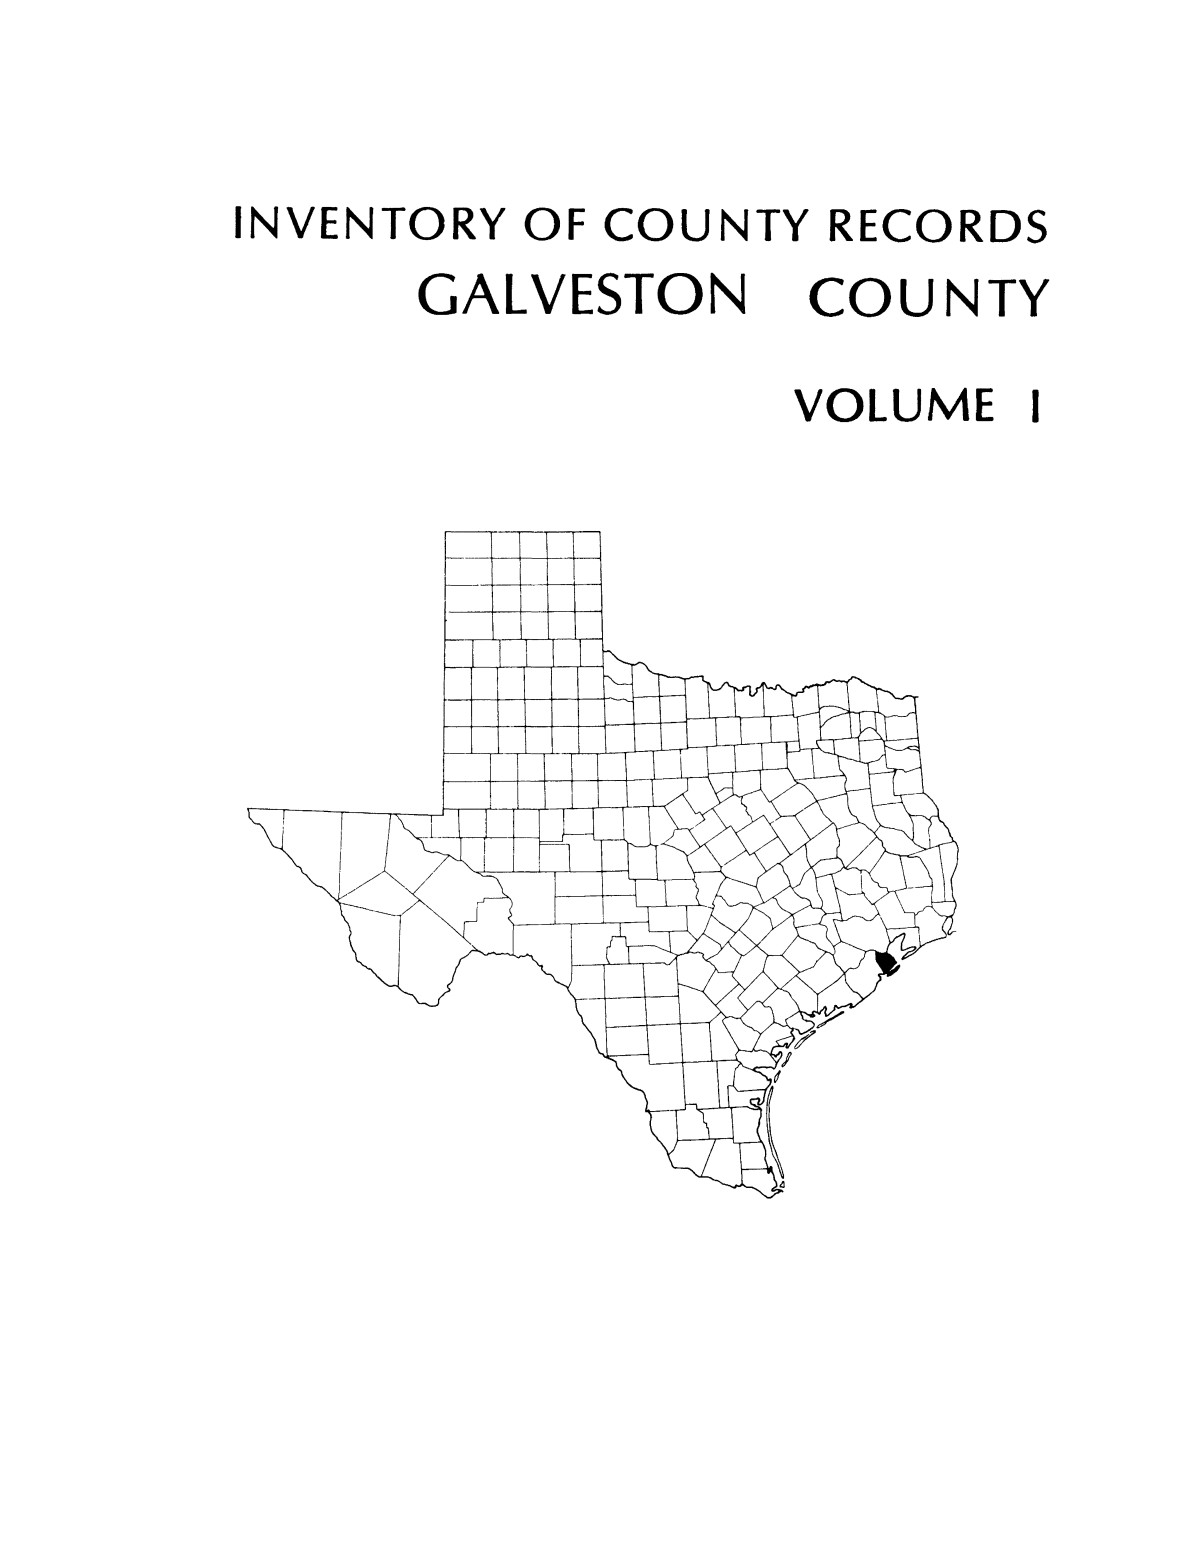 Inventory of county records Galveston County courthouse Galveston